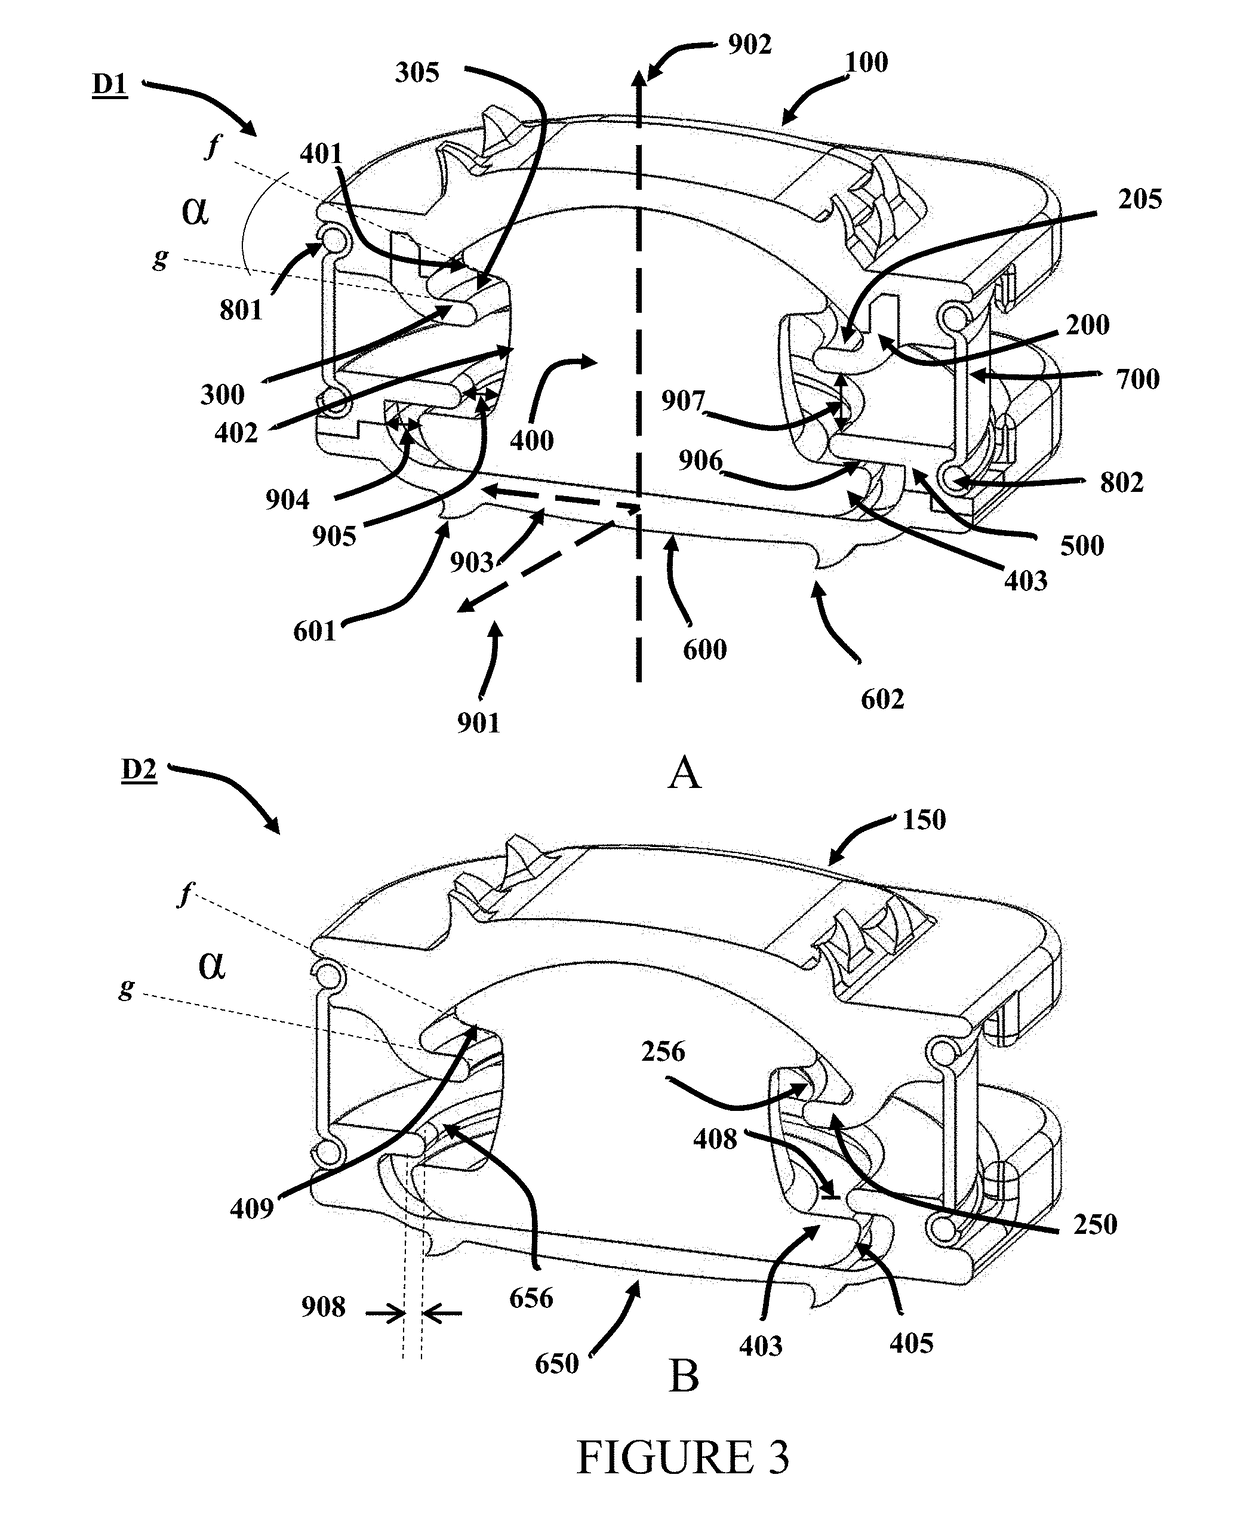 Motion preserving spinal total disc replacement apparatus, method and related systems